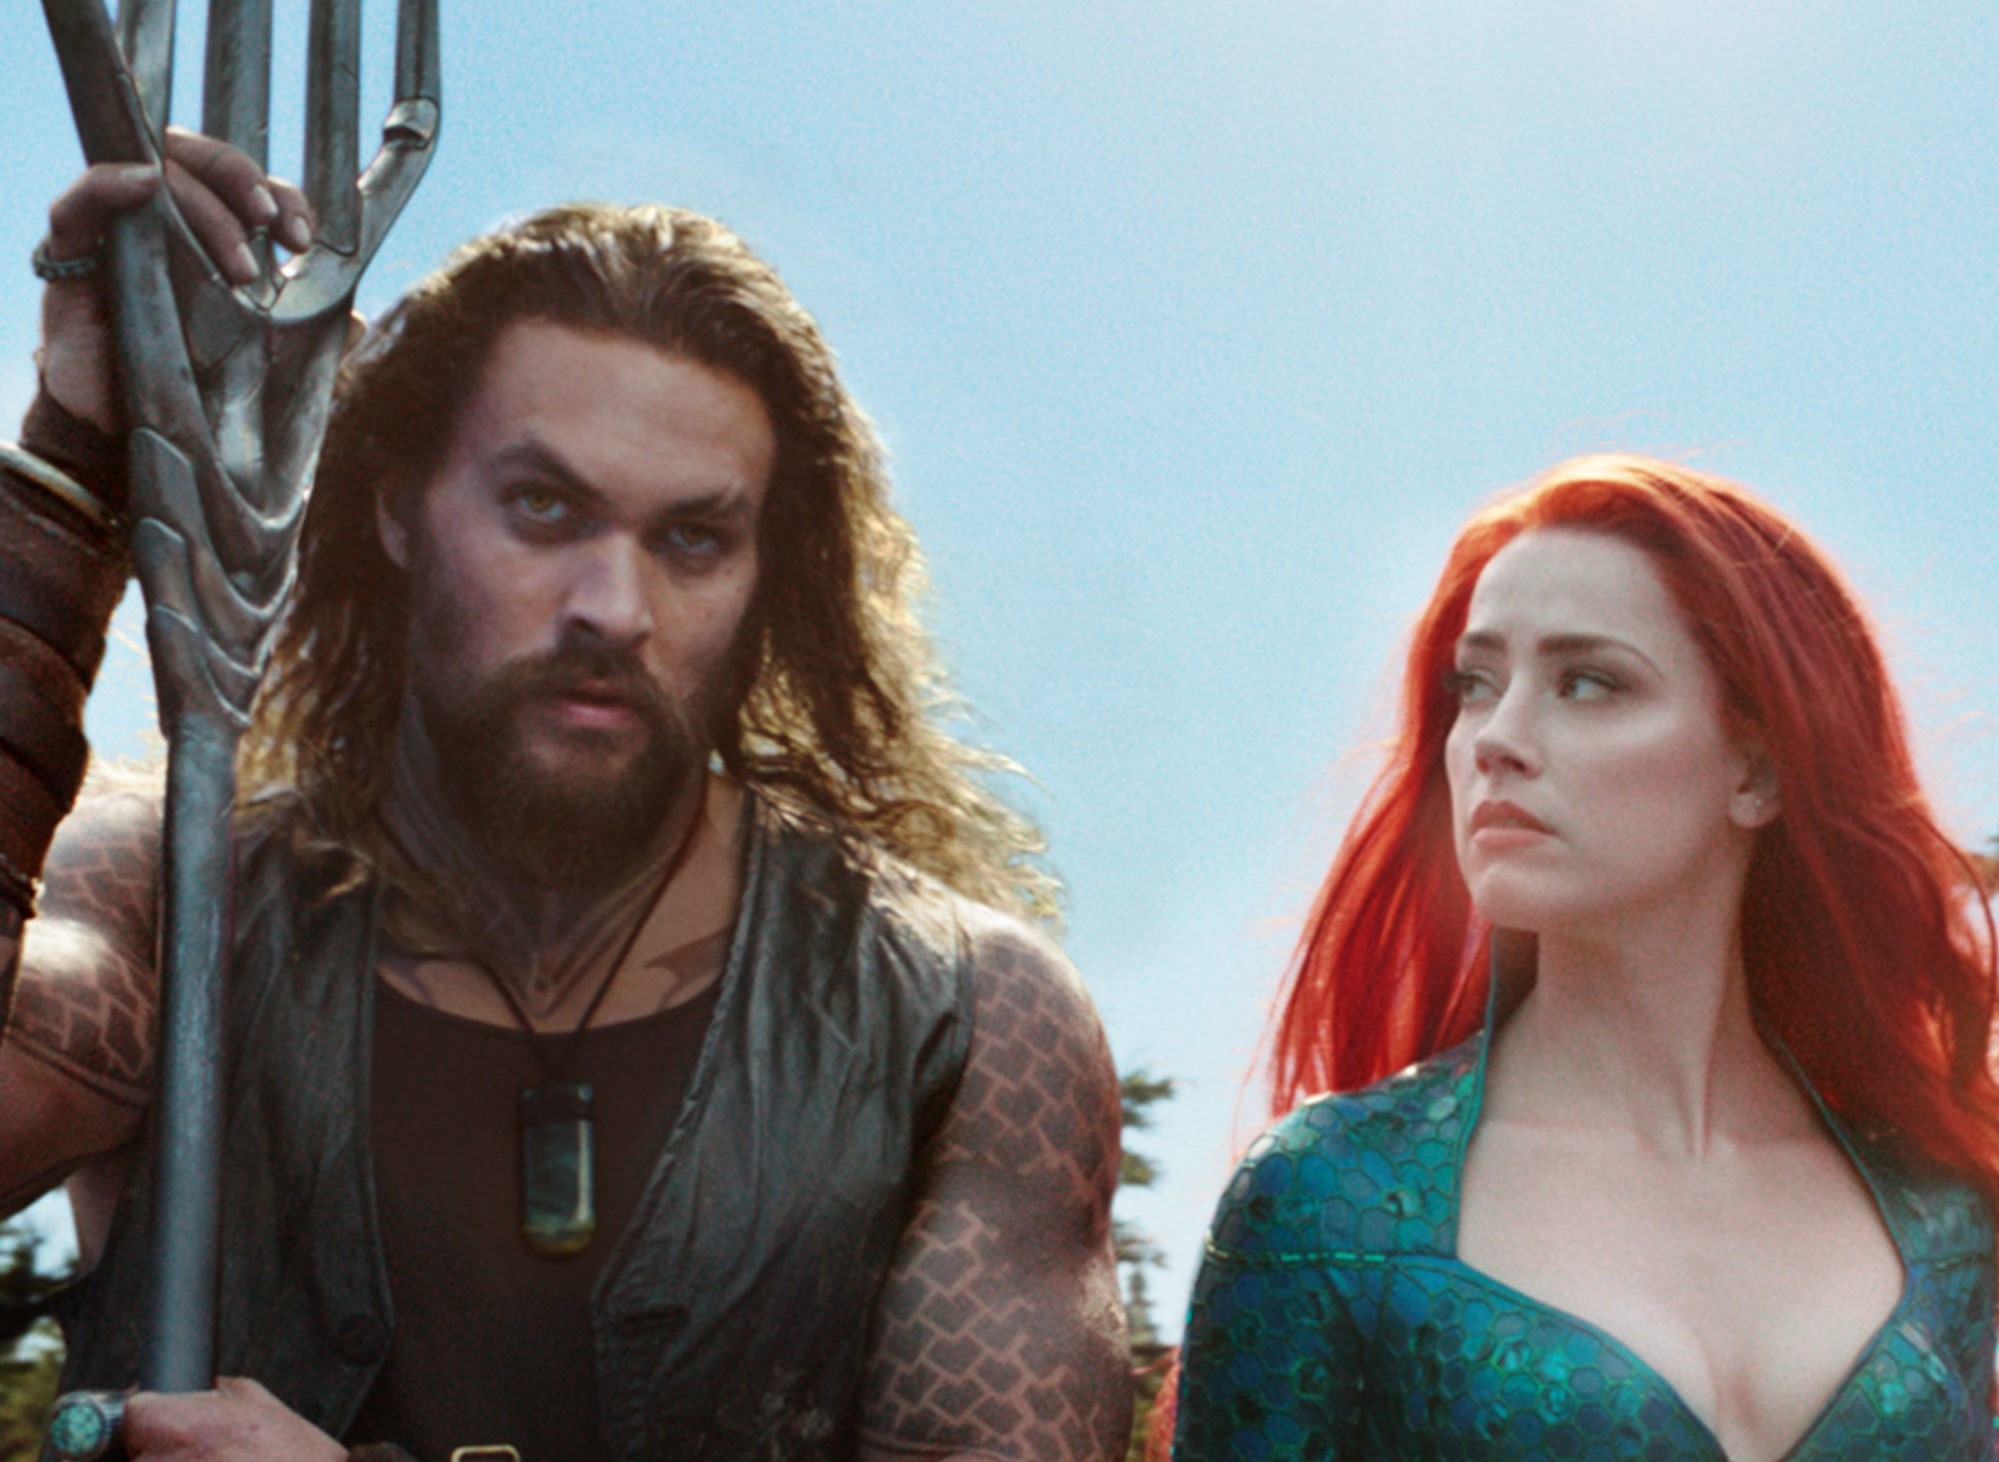 Aquaman 2 Movie Featured Major Plot Changes In
Post-Production